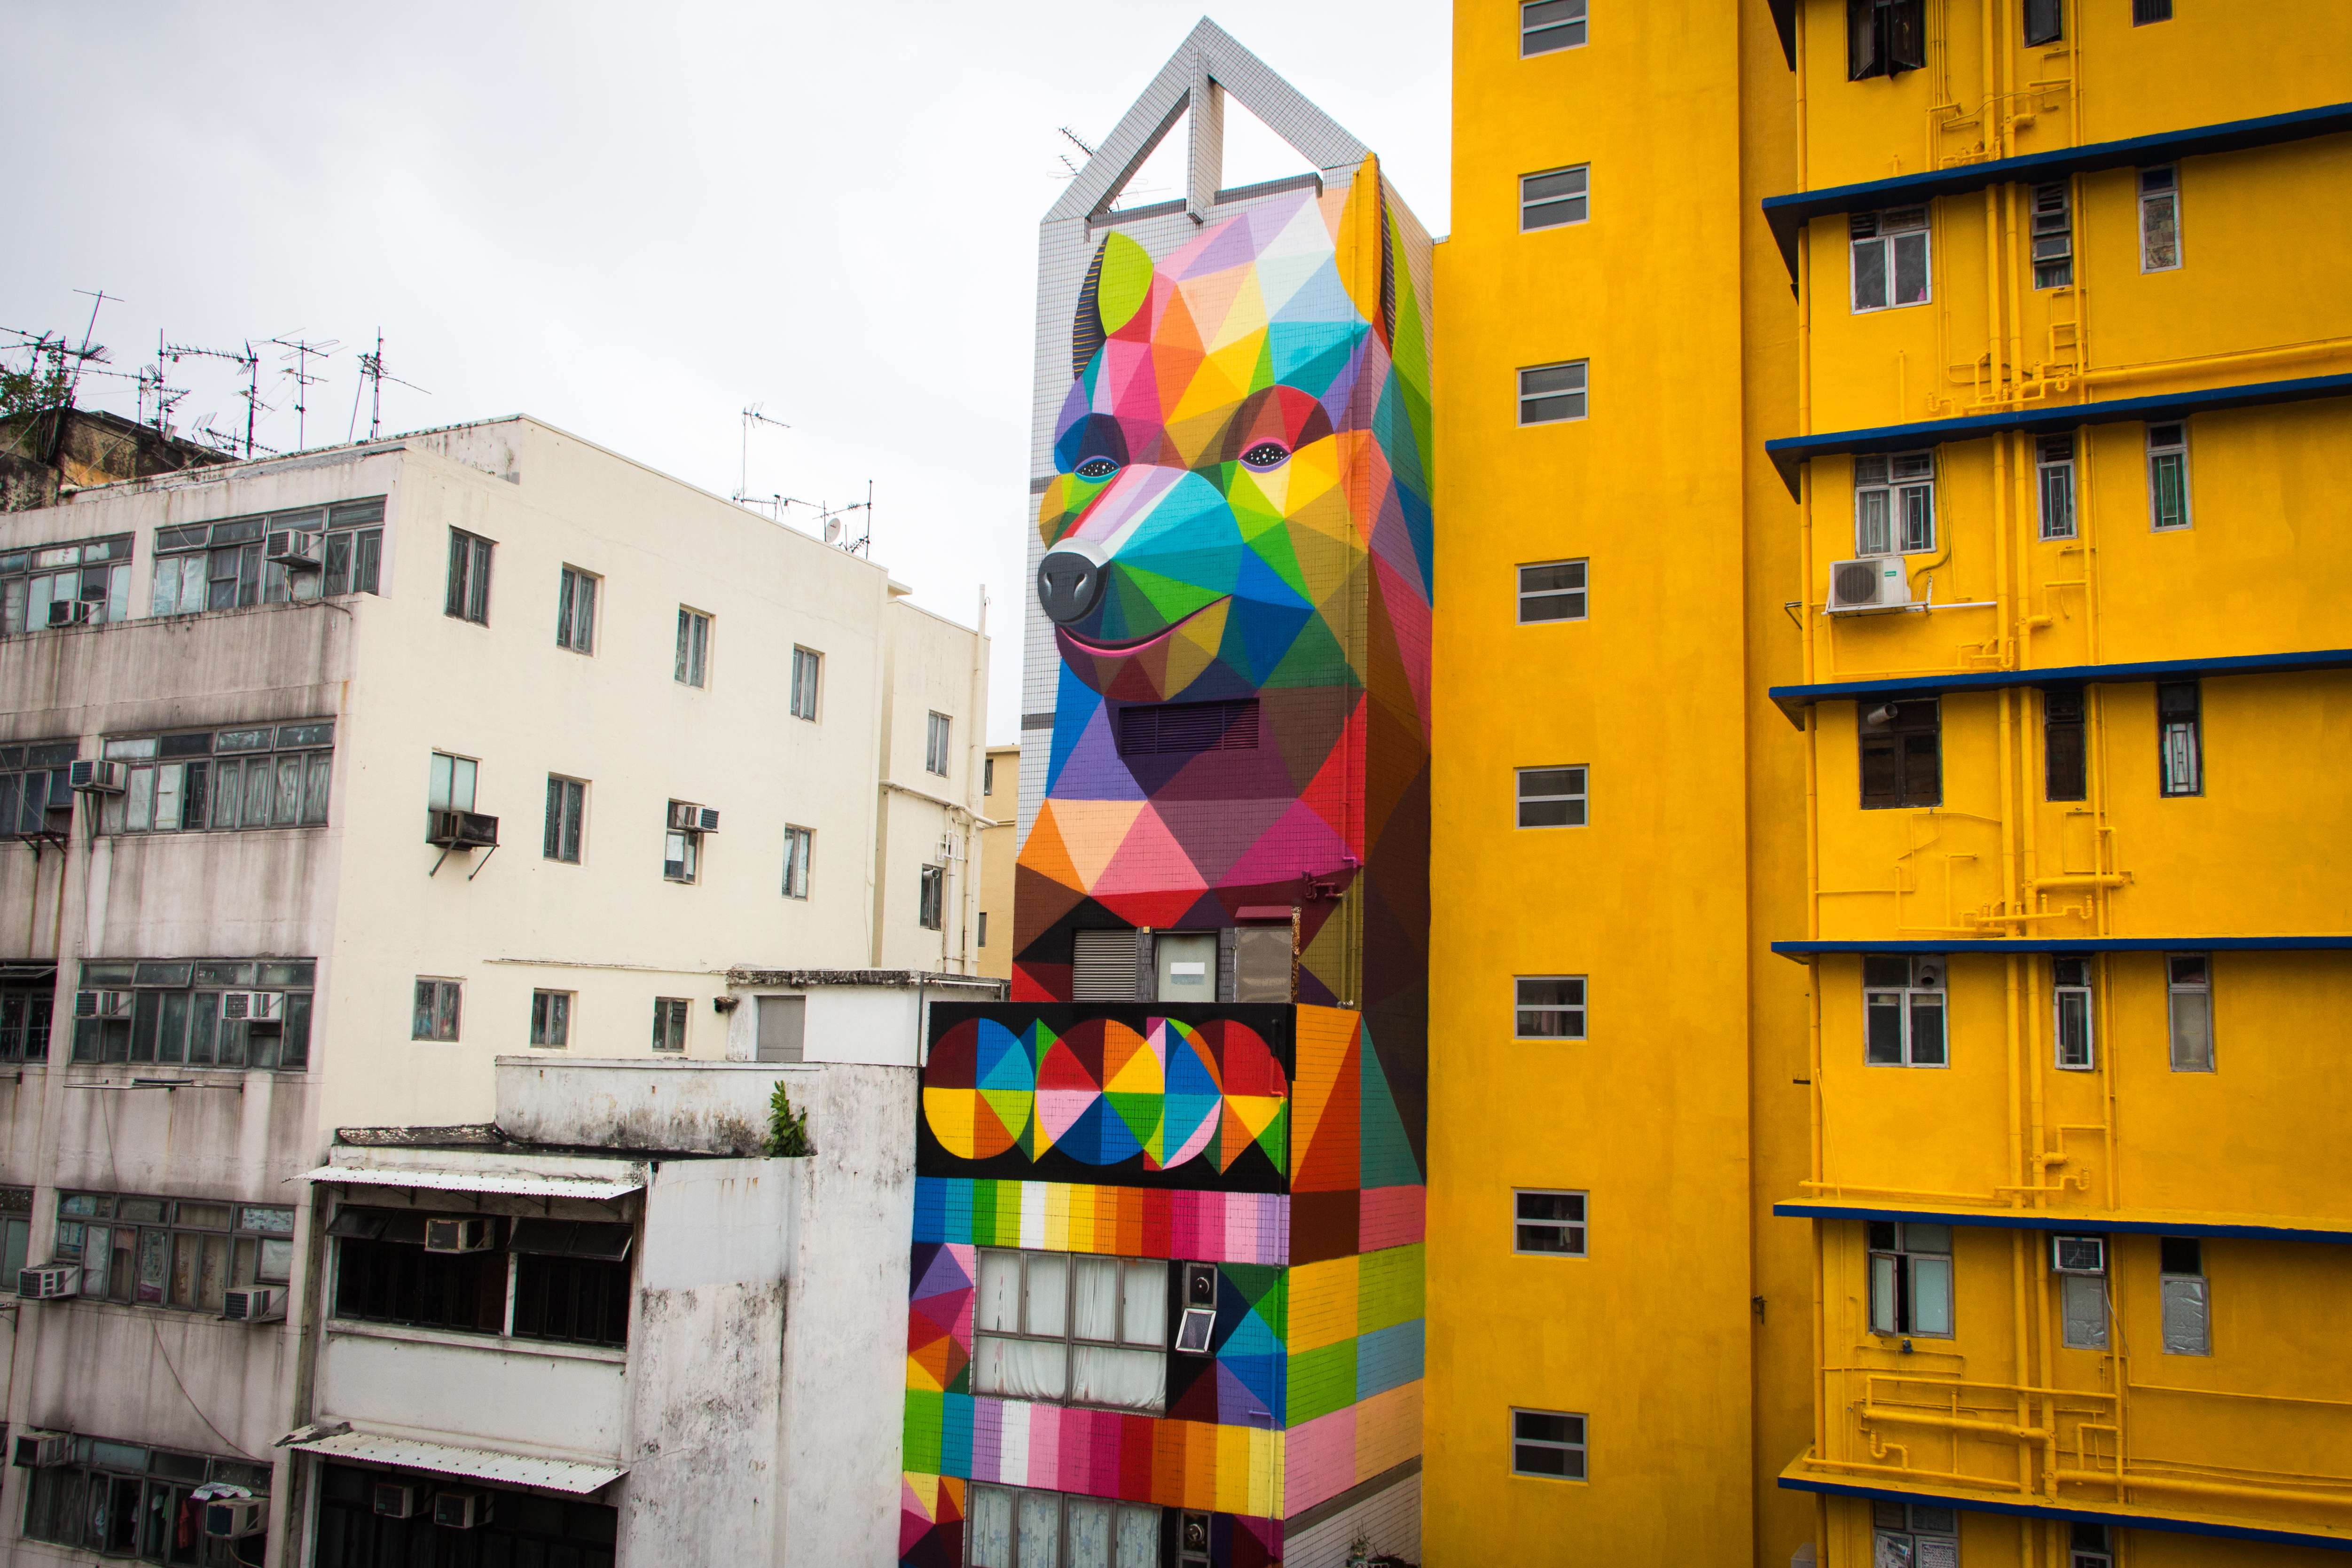 A building owned by Jackaline Chow at 180 Tai Nan Street, Sham Shui Po and painted by Okuda from Spain for the HKwalls event. ‘I love beautiful things,’ says Chow of the decision to donate the builiding for the festival. Photos: Tessa Chan